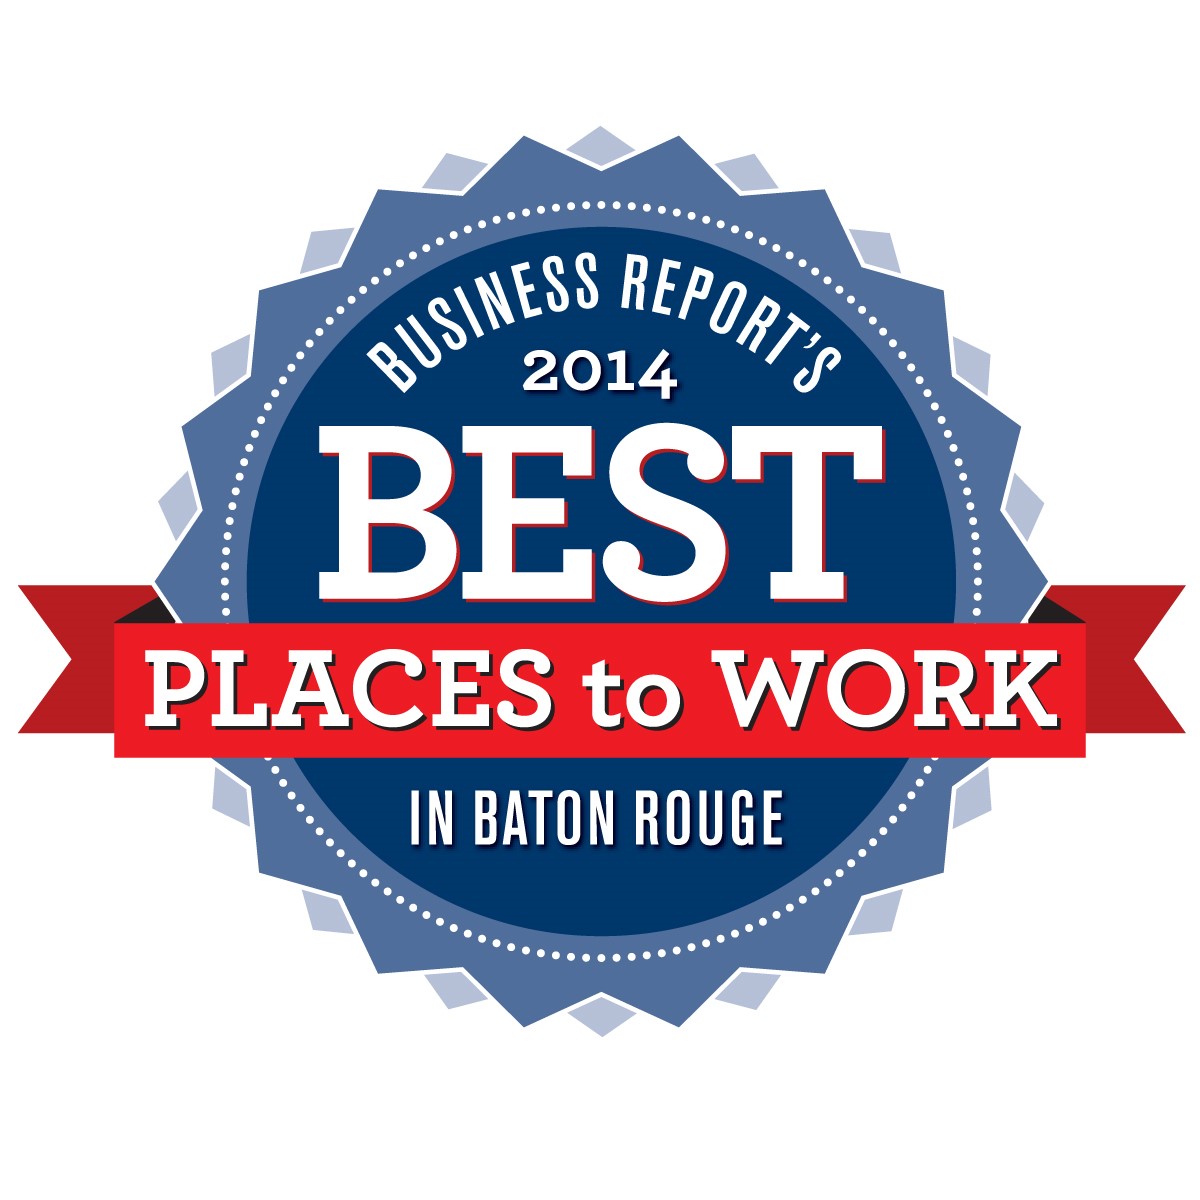 Best Places to Work.jpg